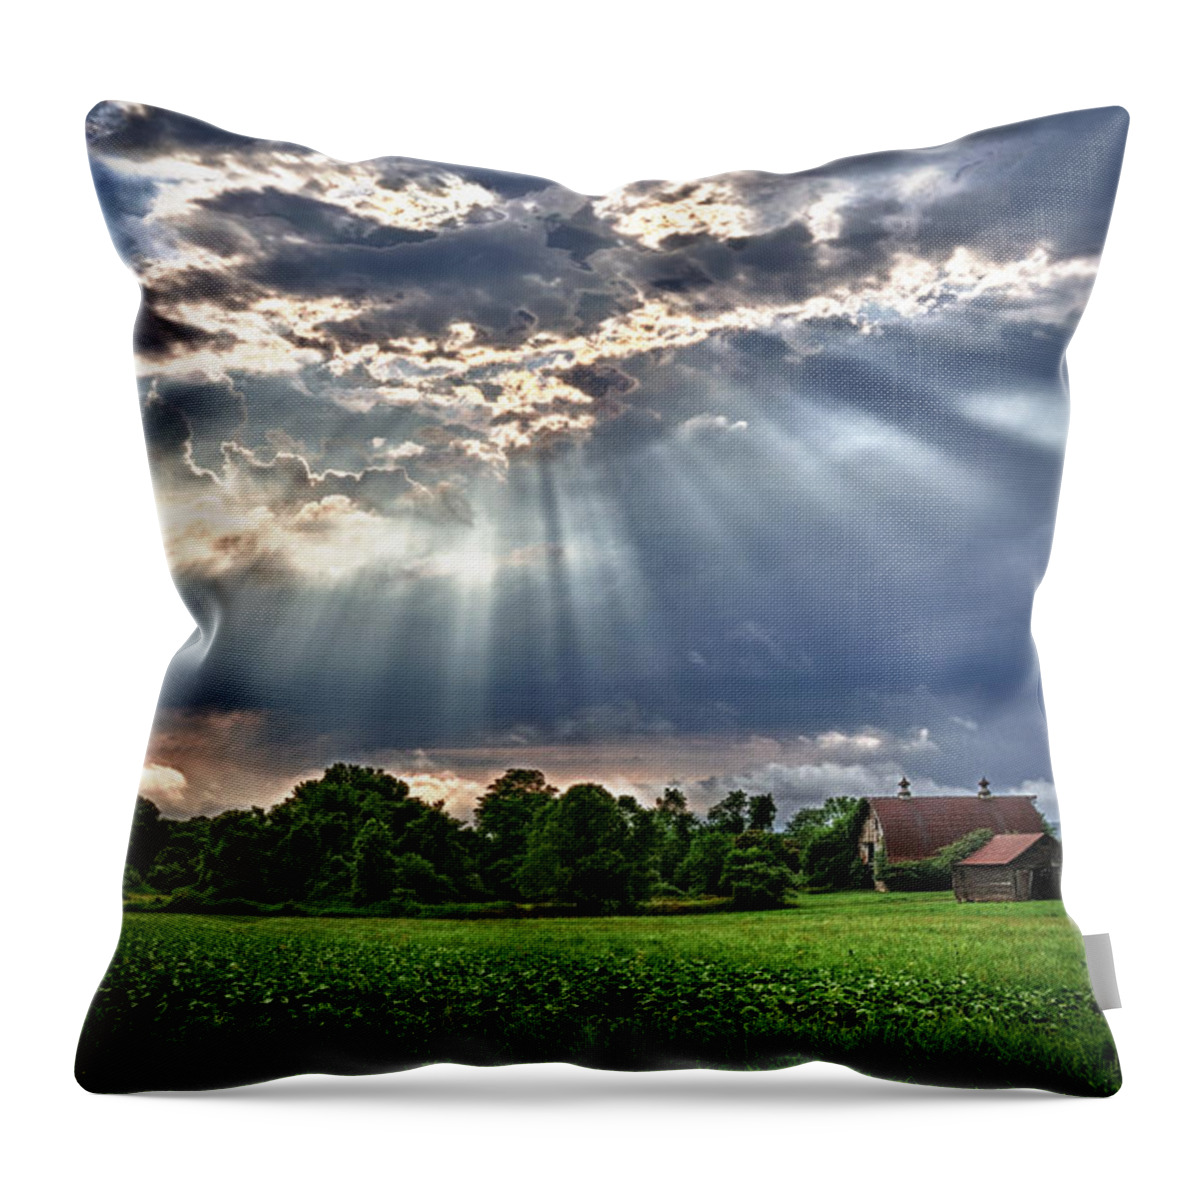 Barn Throw Pillow featuring the photograph And The Heavens Opened 1 by Mark Fuller